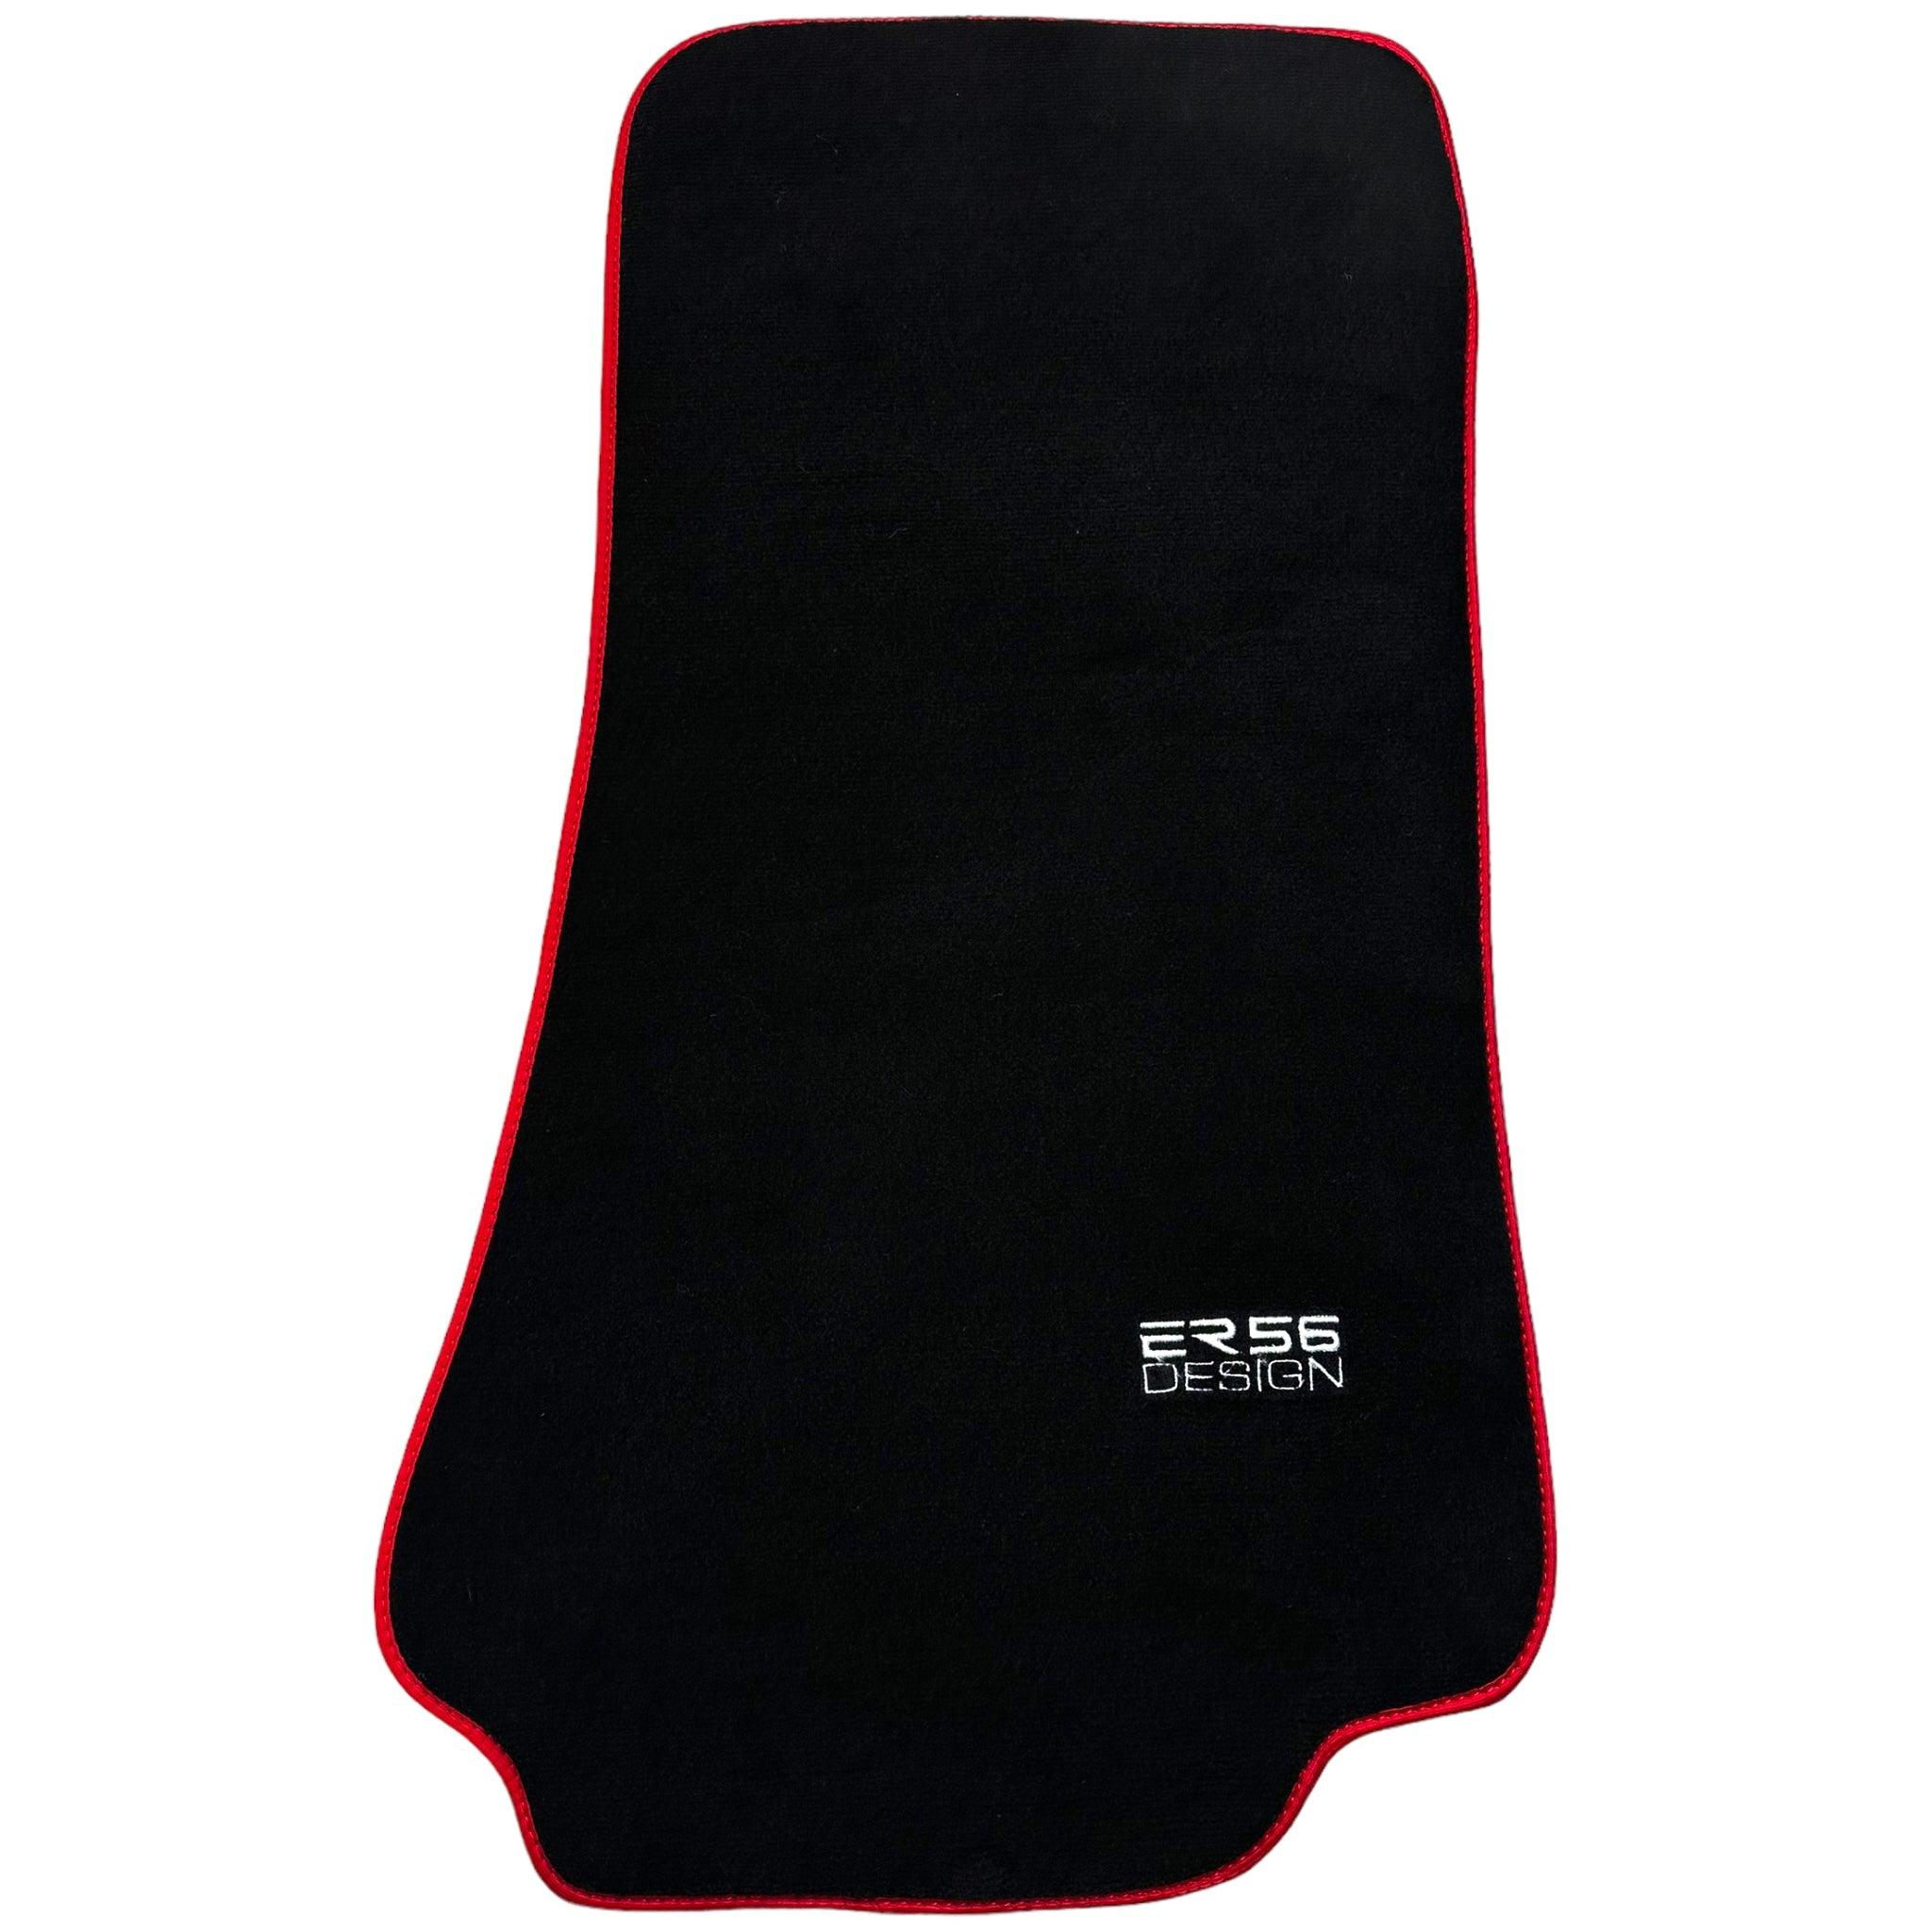 Black Floor Mats For BMW 8 Series E31 2-door Coupe (1989-1999) ER56 Design with Red Trim